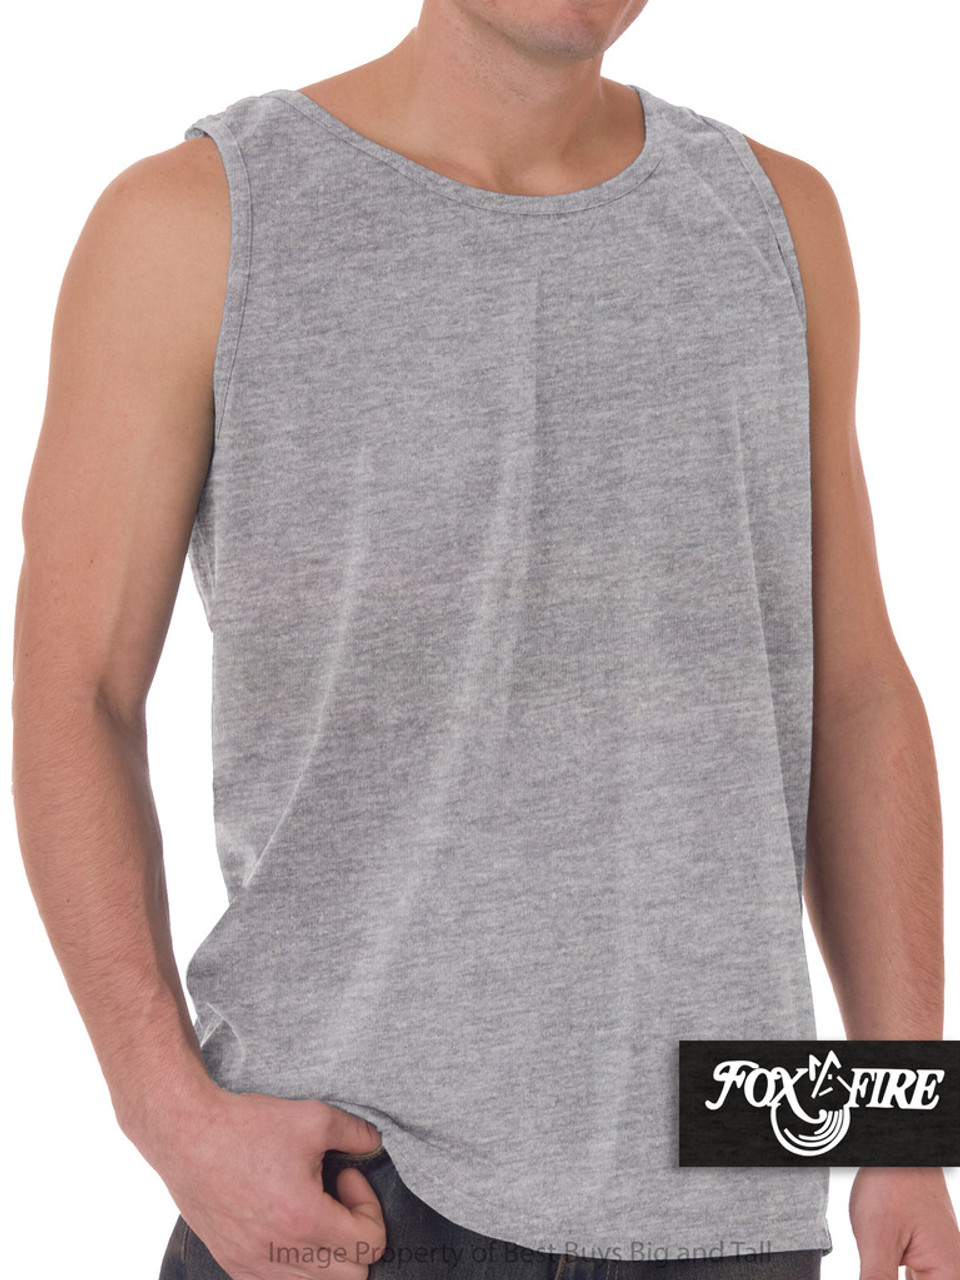 HEATHER GRAY Tank Top and Tall Men by Foxfire